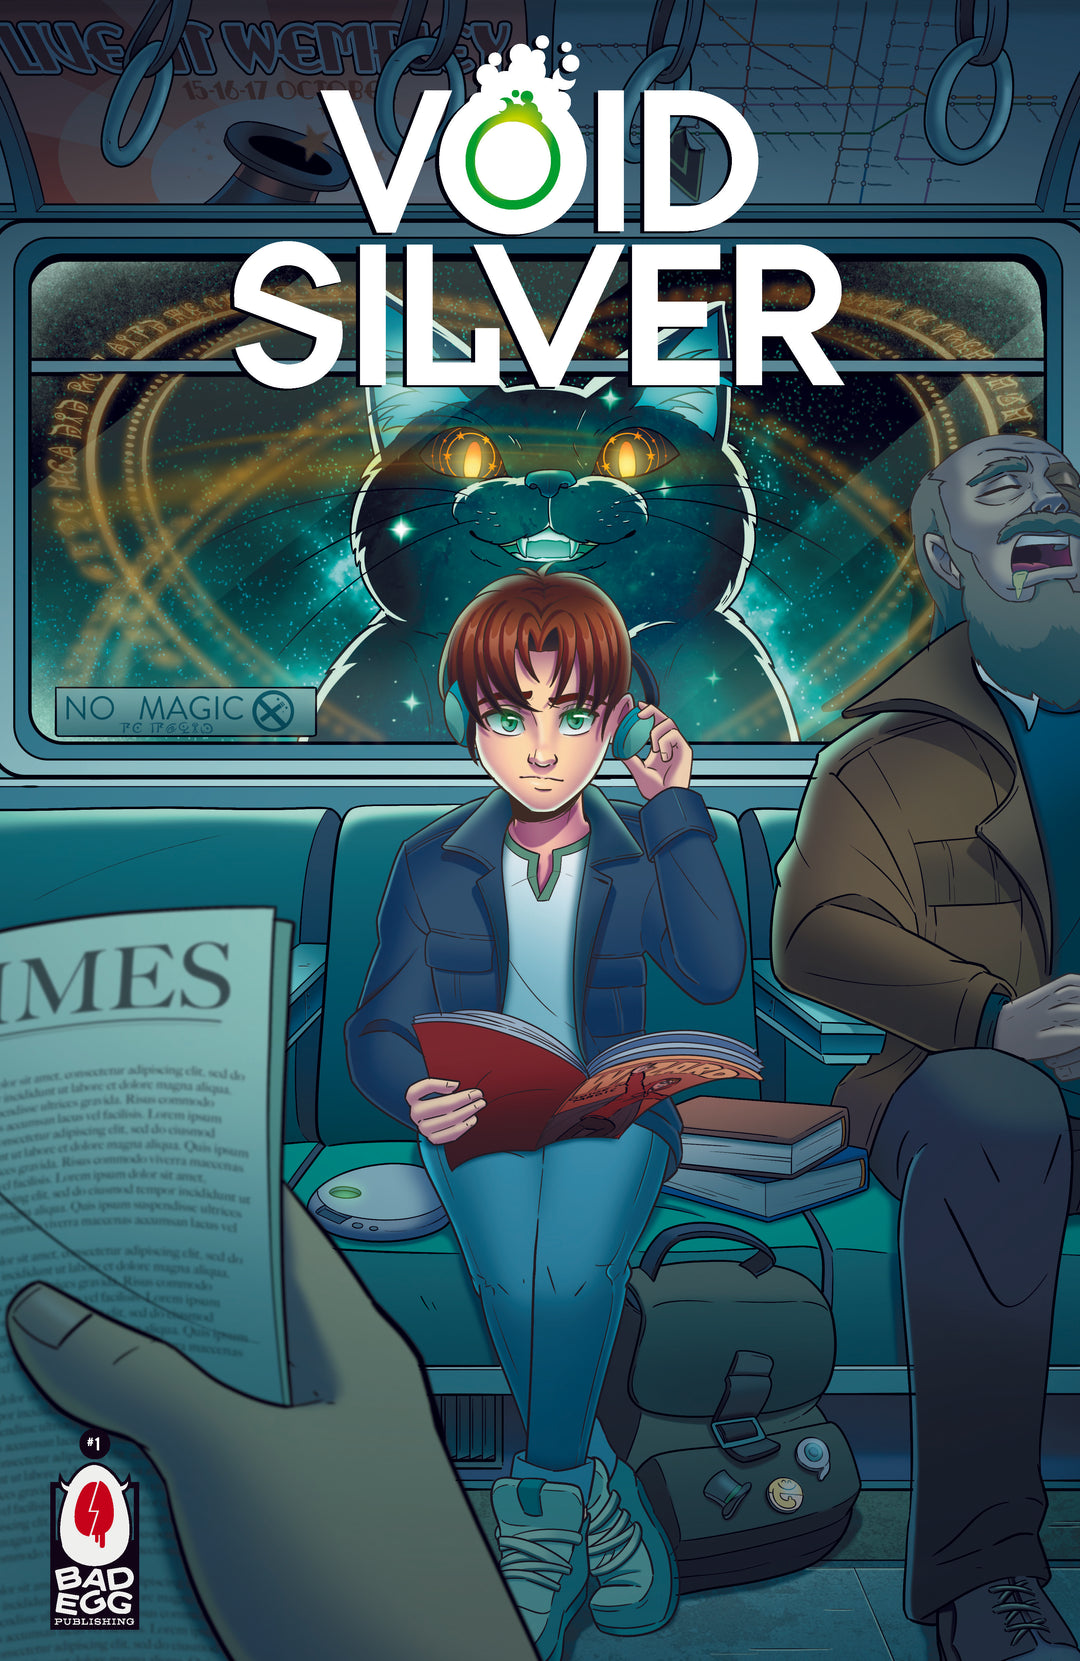 Void Silver #01 - COVER A